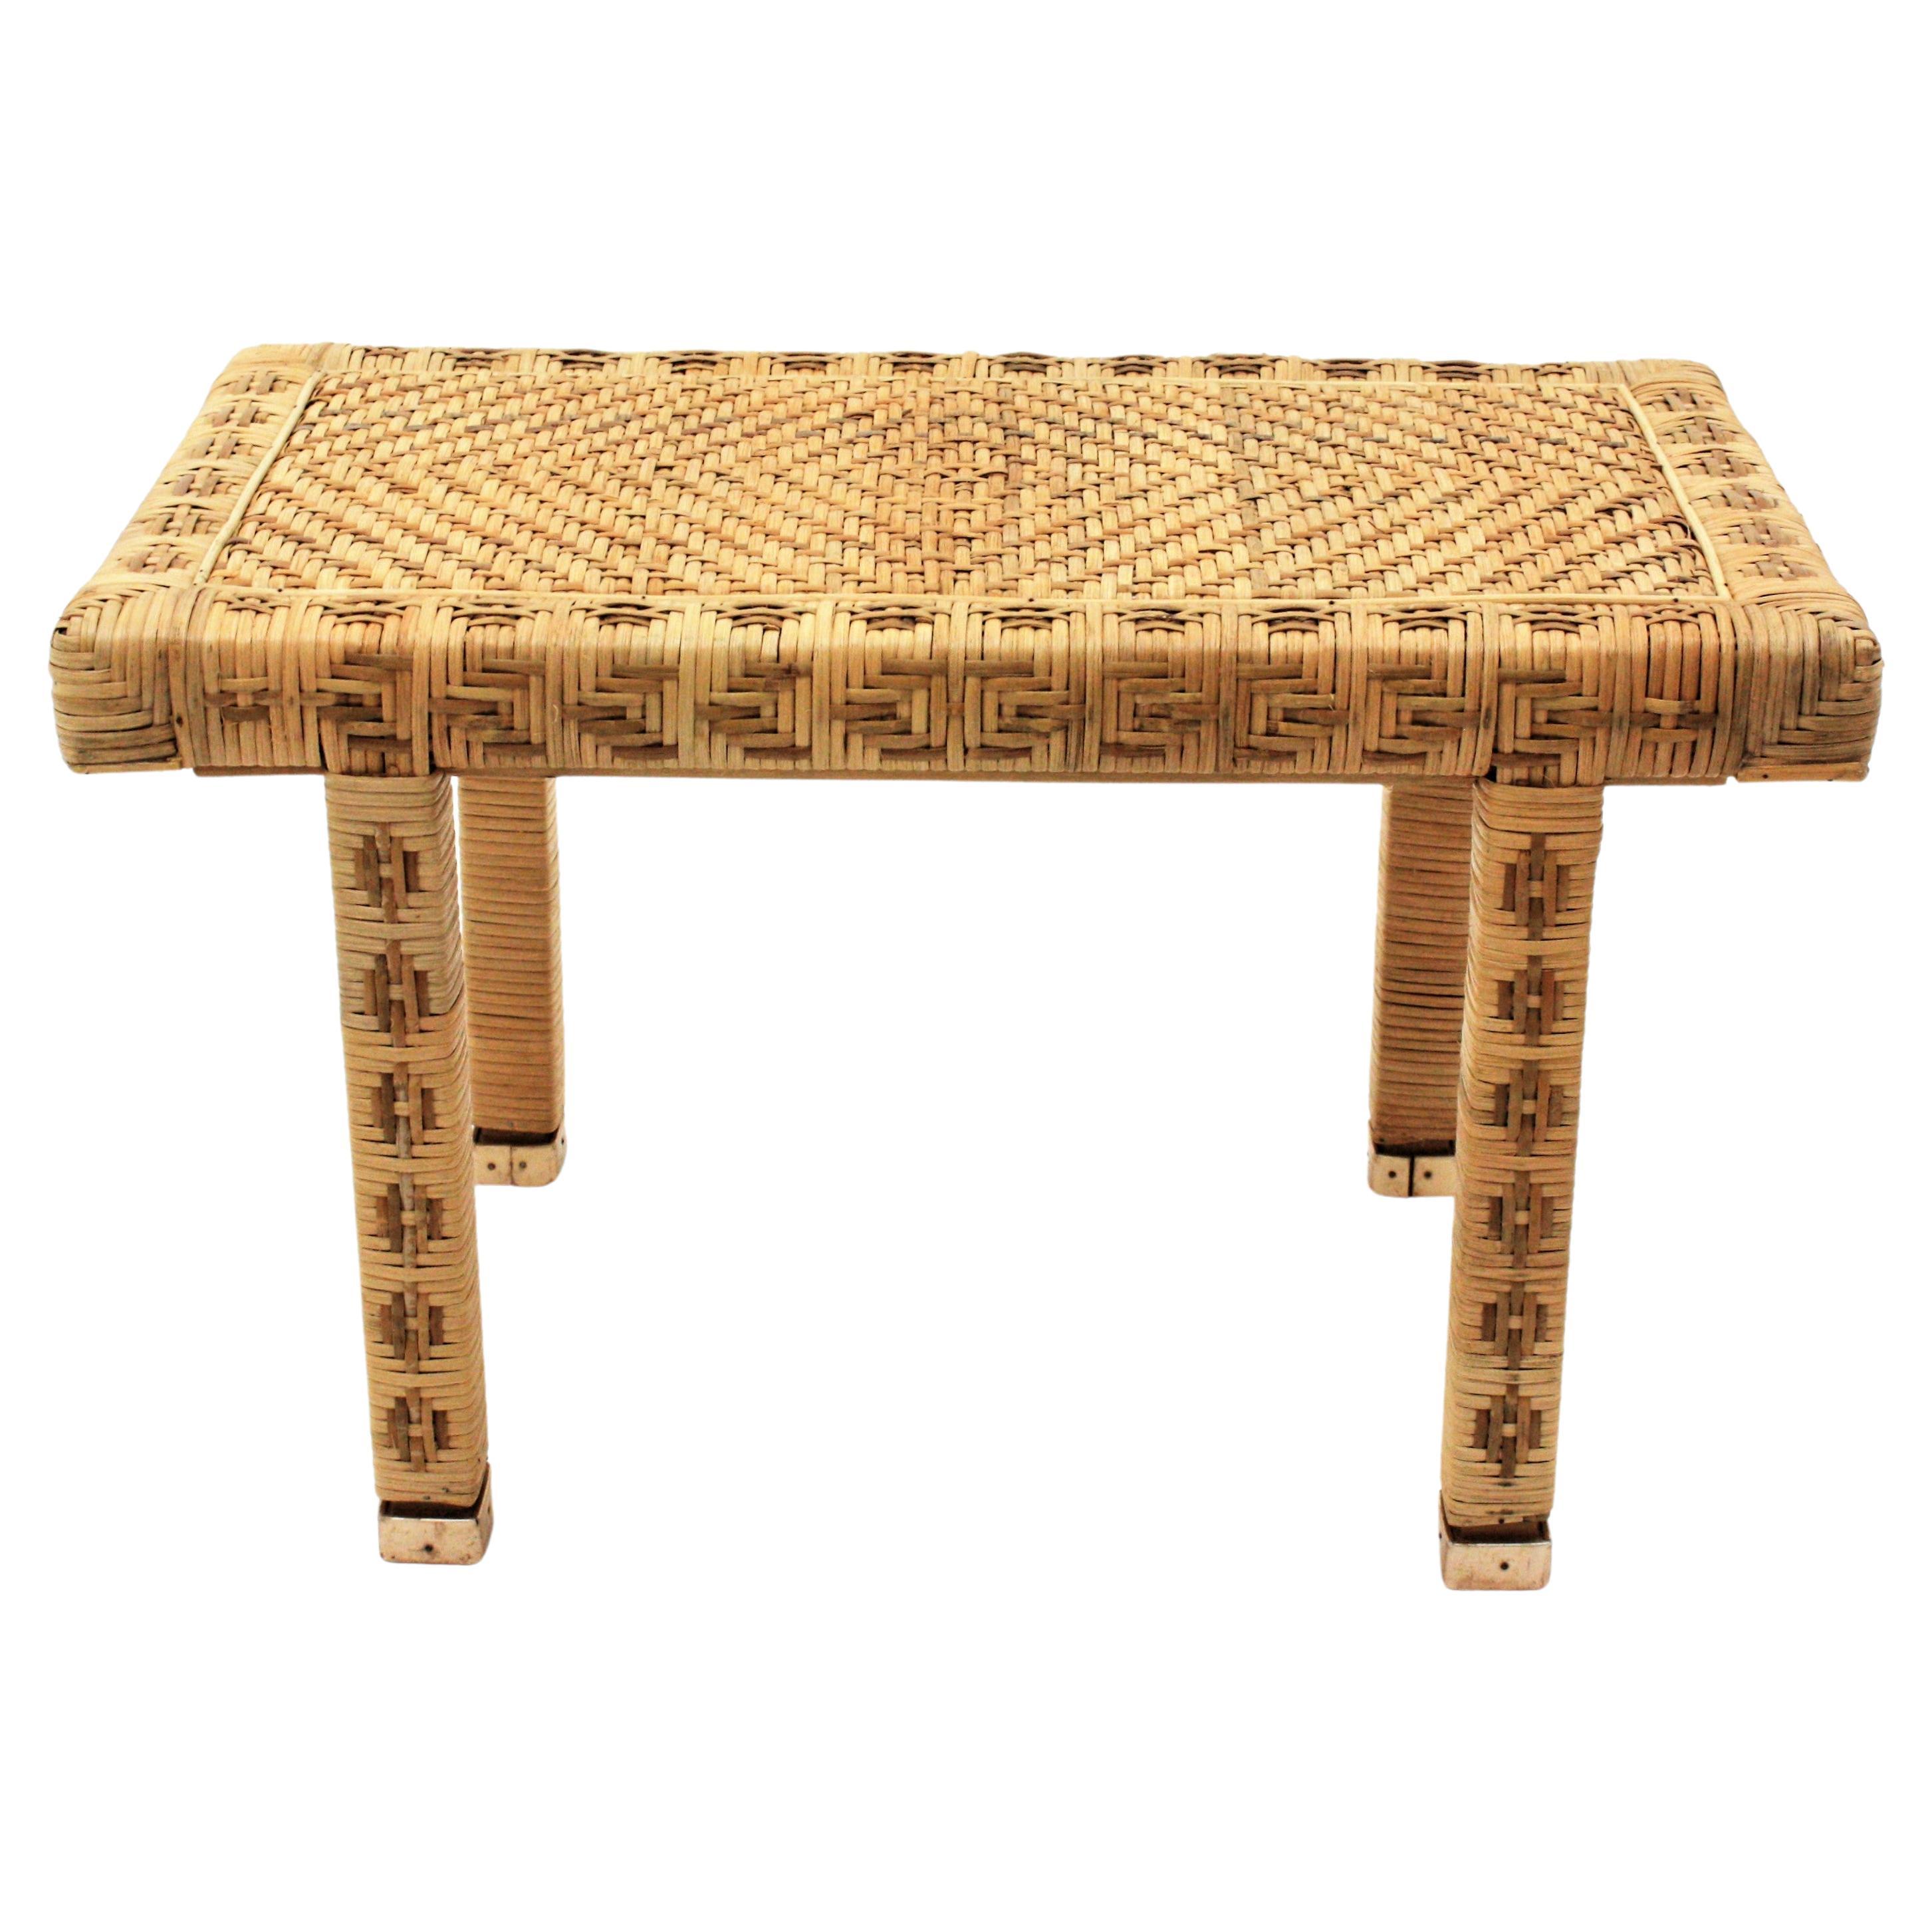 Hand-Braided wicker rectangular stool or side table. Spain, 1930s.
On a wooden structure this rectangular stool was upholstered with an artisan hand-woven wicker work.
Hundreds of wicker or rattan straps are nicely braided creating geometric